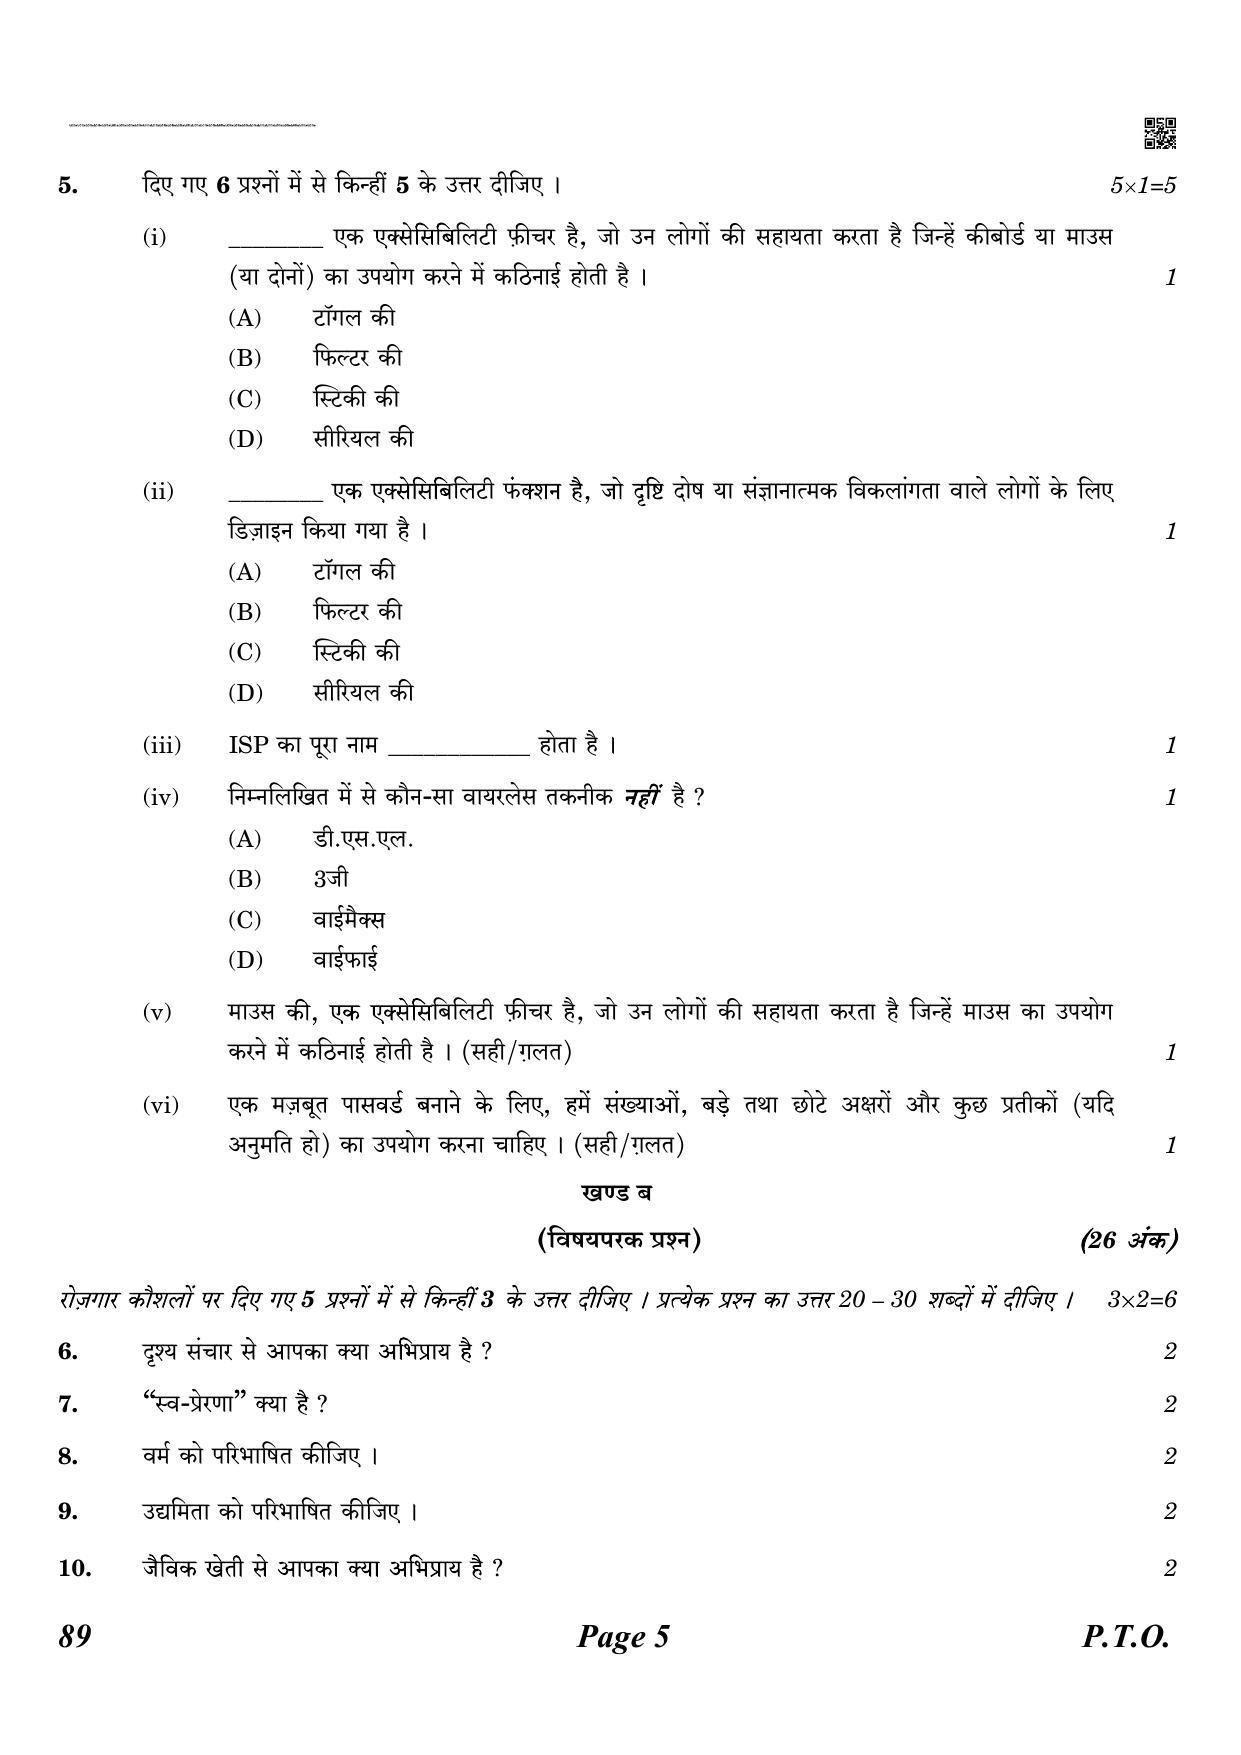 CBSE Class 10 QP_402_INFORMATION_TECH_HINDI 2021 Compartment Question Paper - Page 5